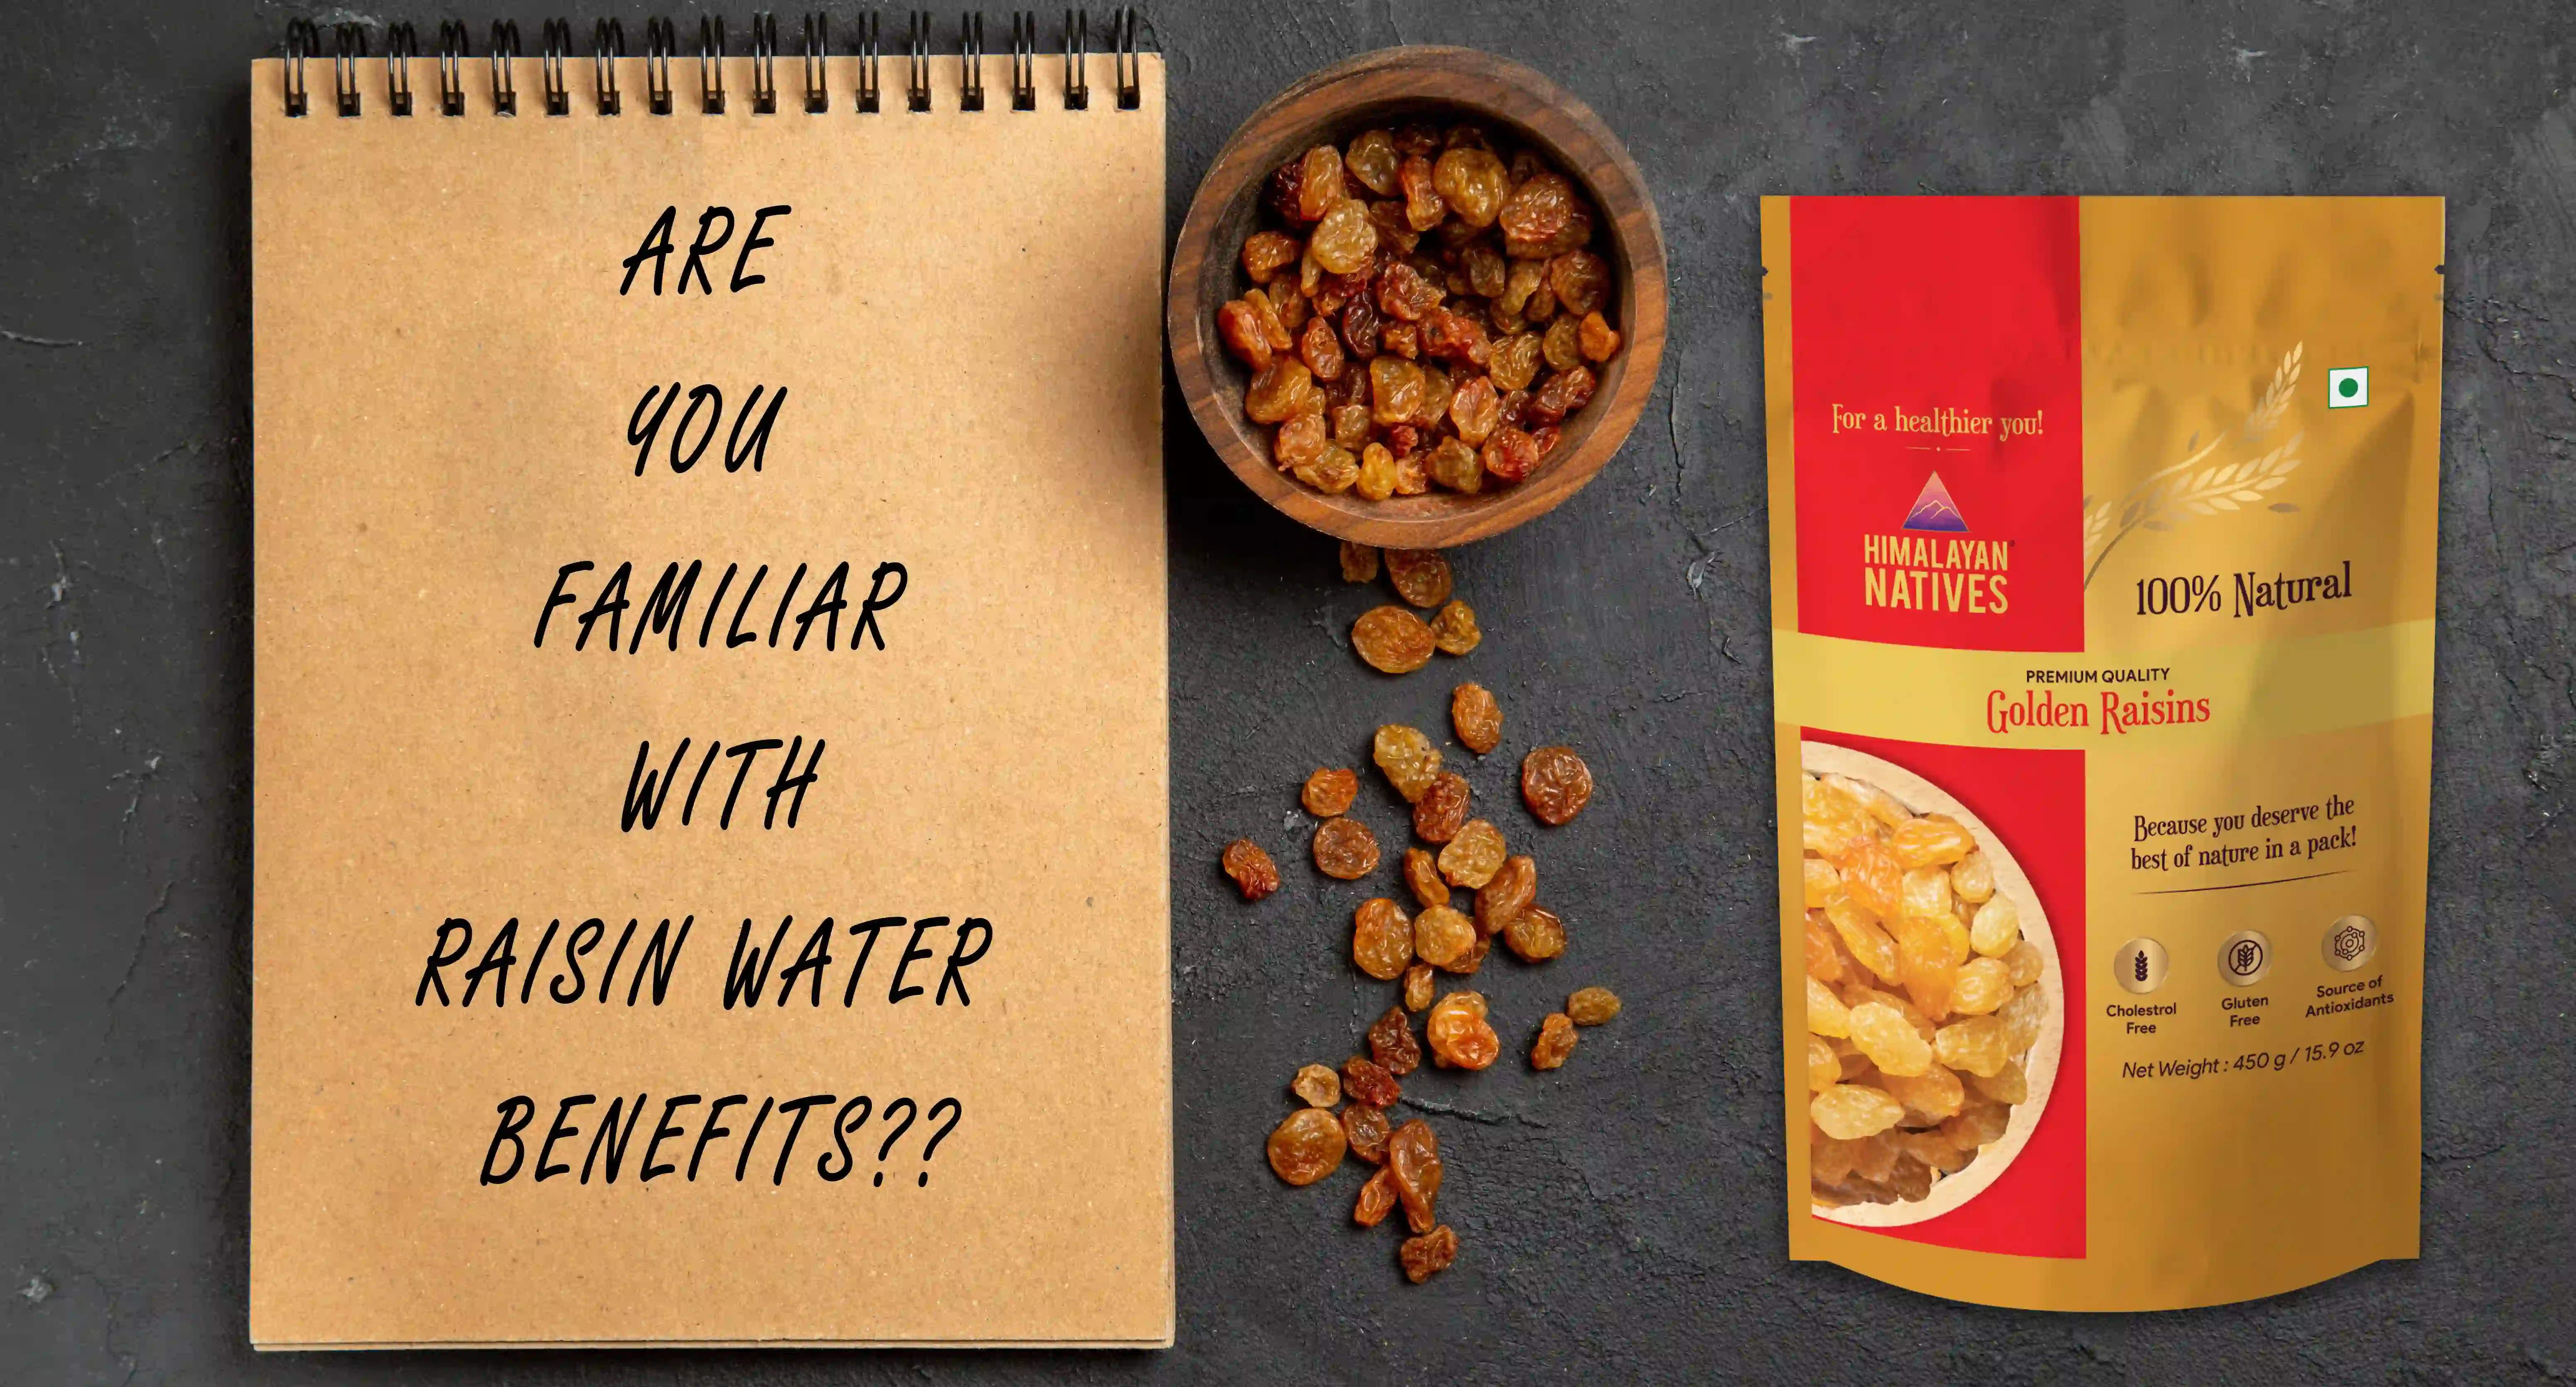 Are you familiar with Raisin Water Benefits?